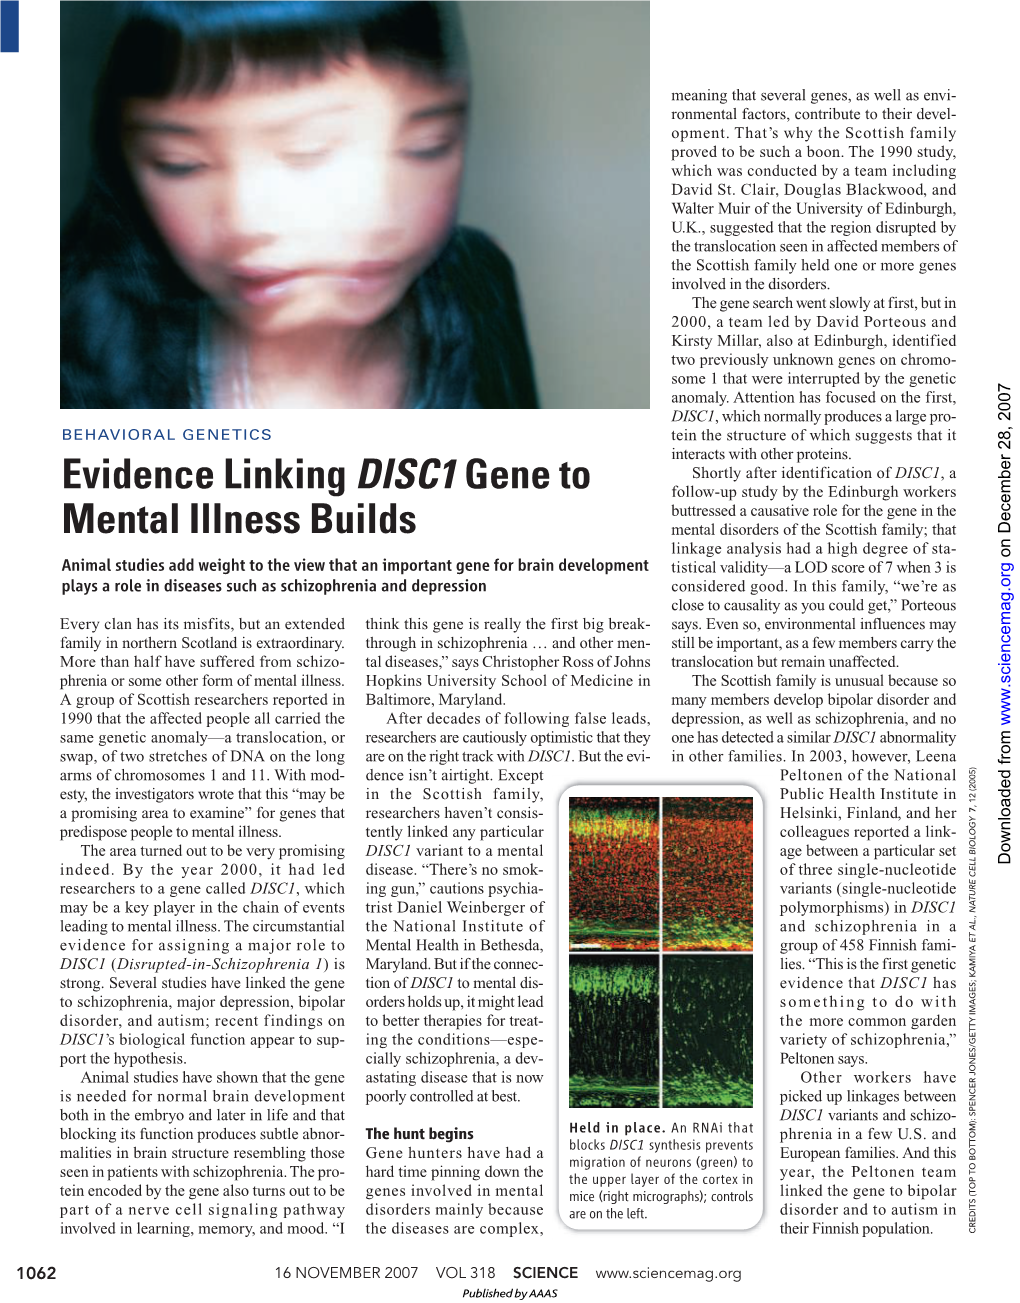 Evidence Linking DISC1 Gene to Mental Illness Builds